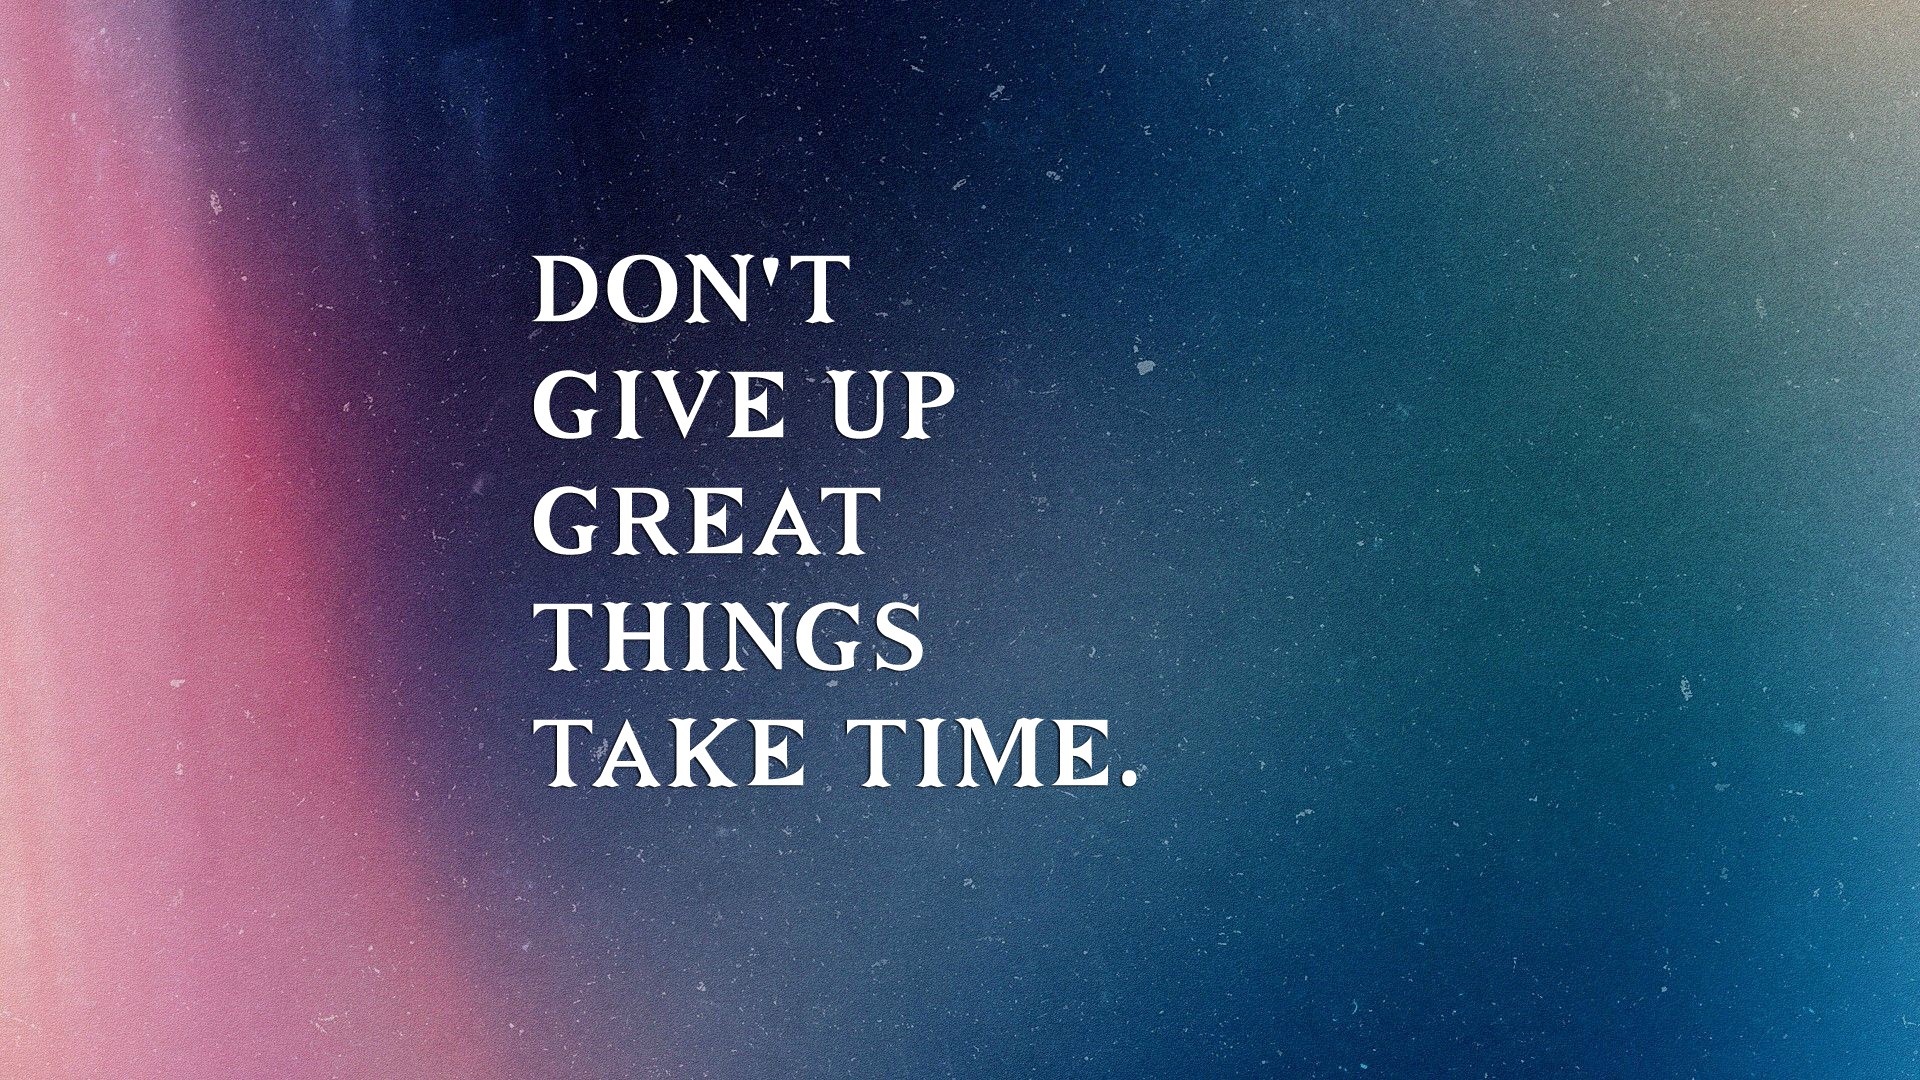 Dont Give Up Great Things Take Time - 1920x1080 Wallpaper 